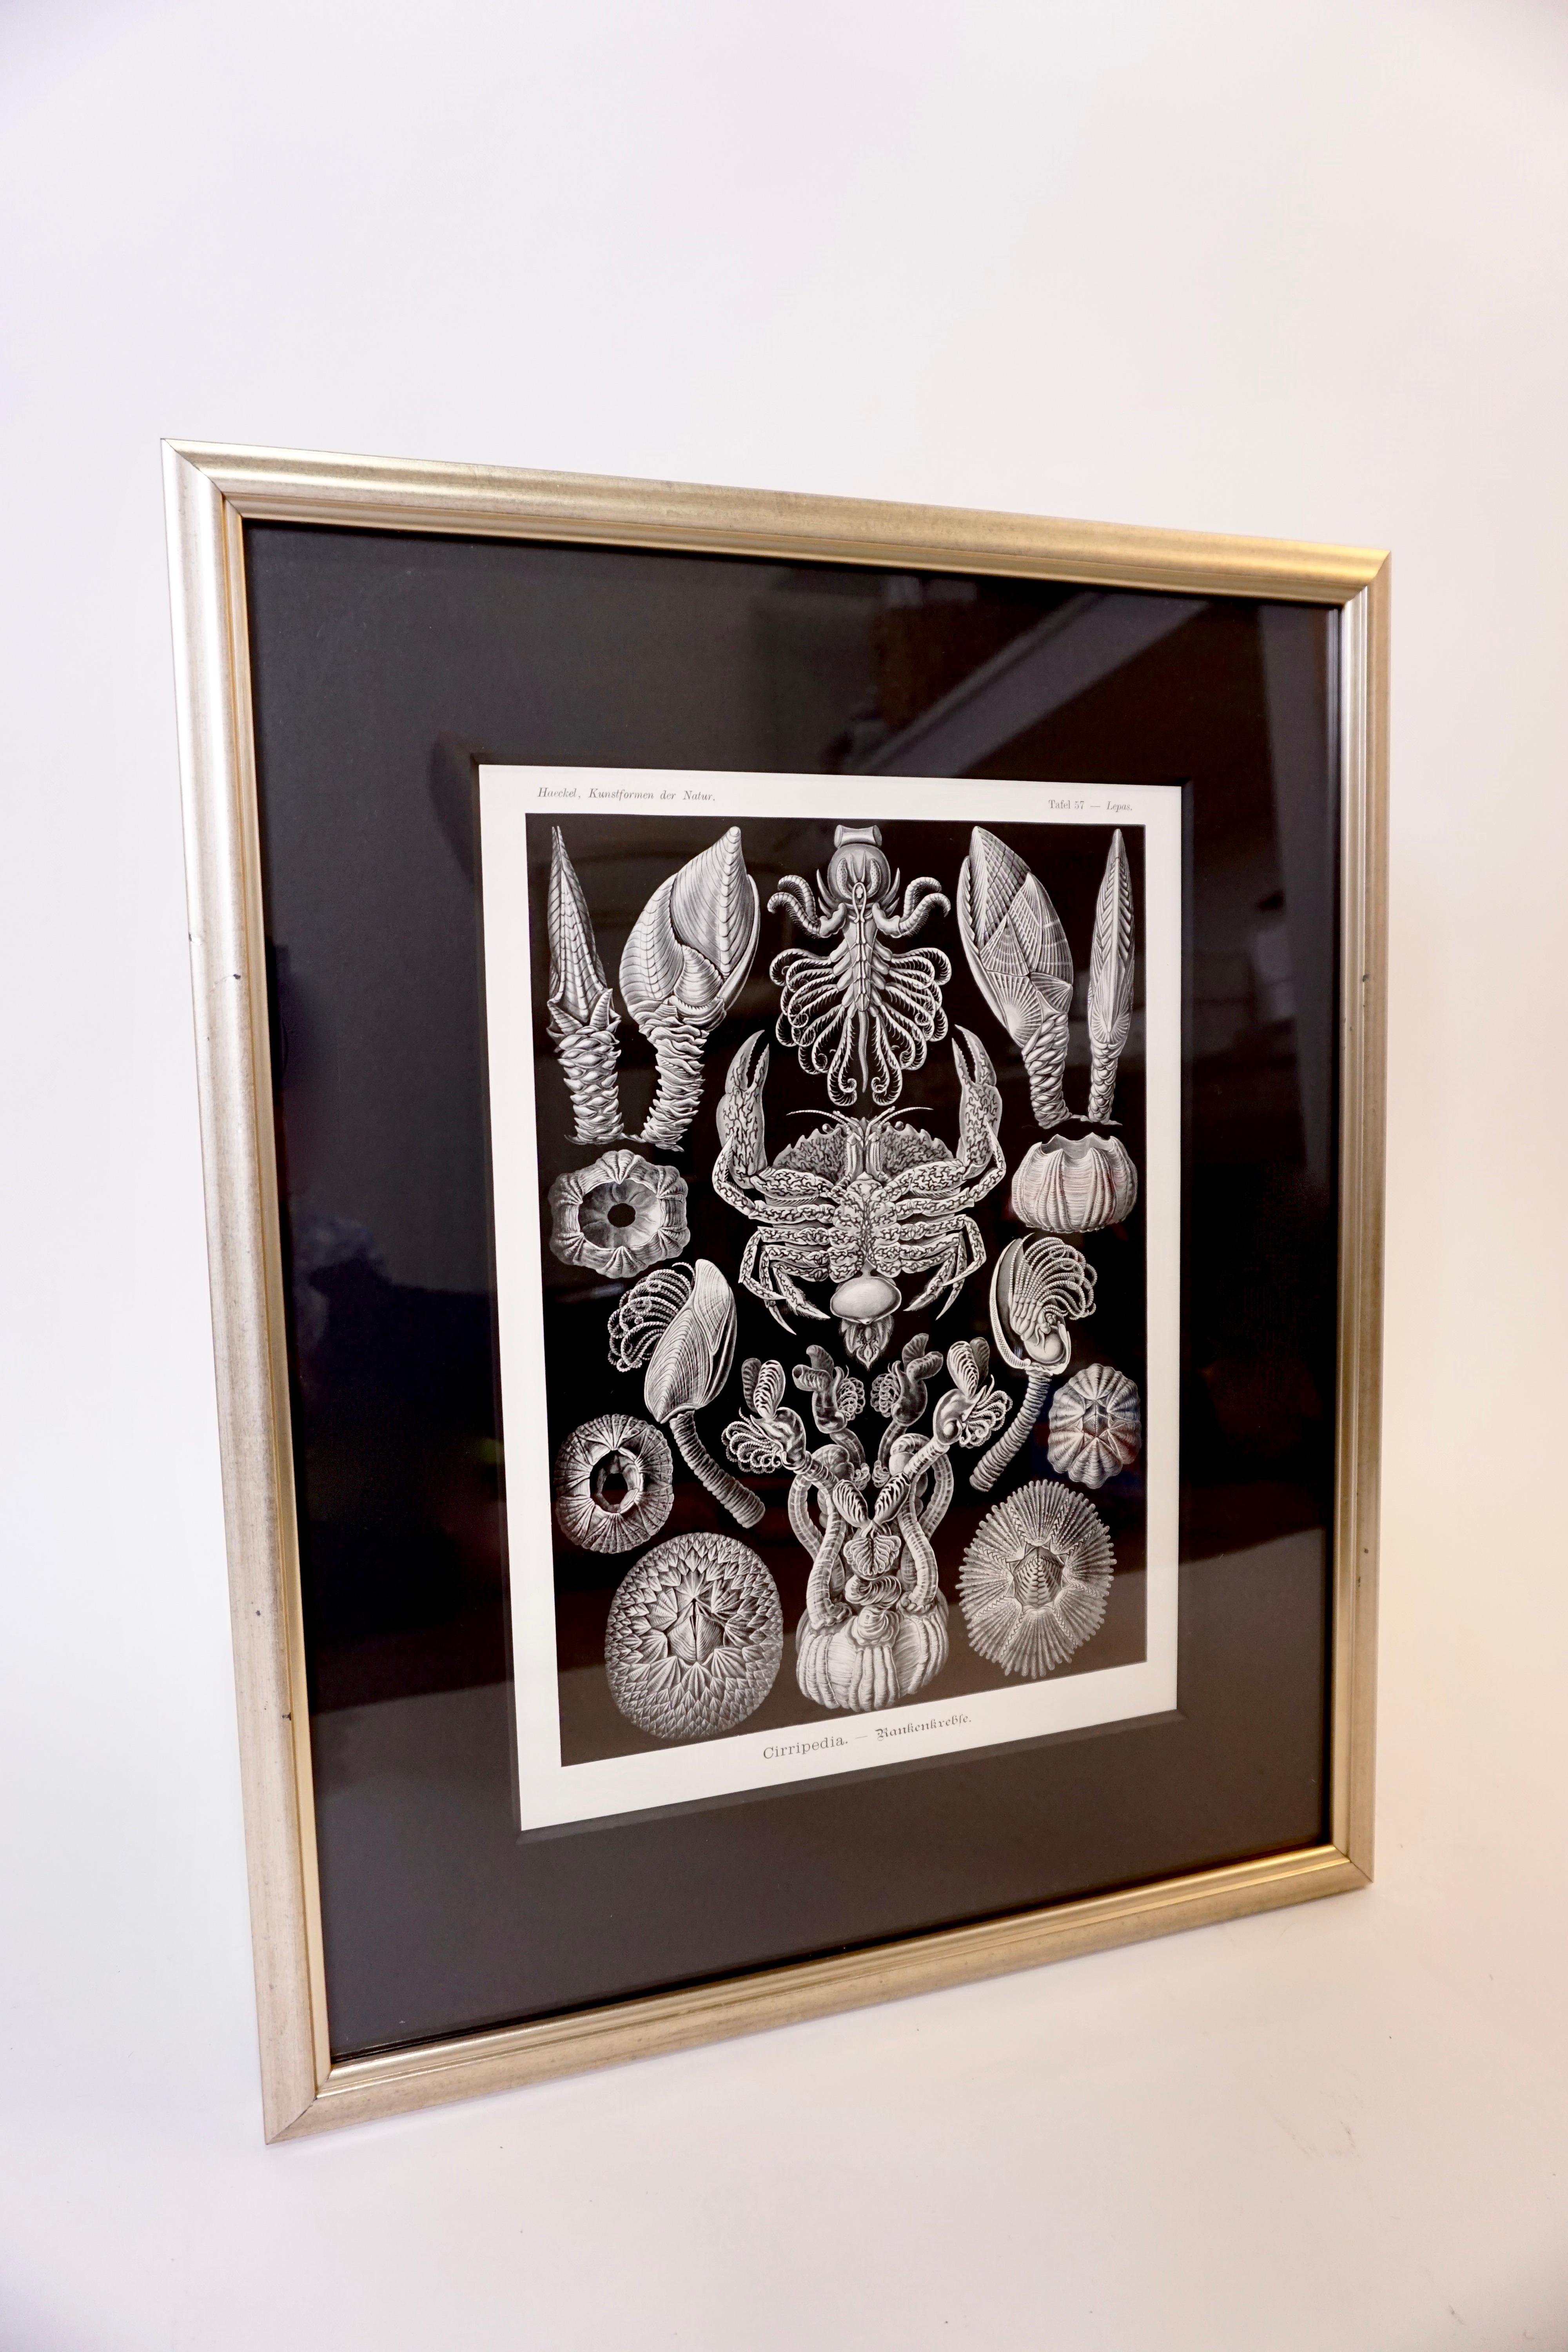 Original print from German zoologist Ernst Haeckel's book Art Forms of Nature (1899). Print is showcased in a silver frame with a black mat.

Dimensions:
Width: 15 in
Height: 18.5 in
Depth: 1 in.